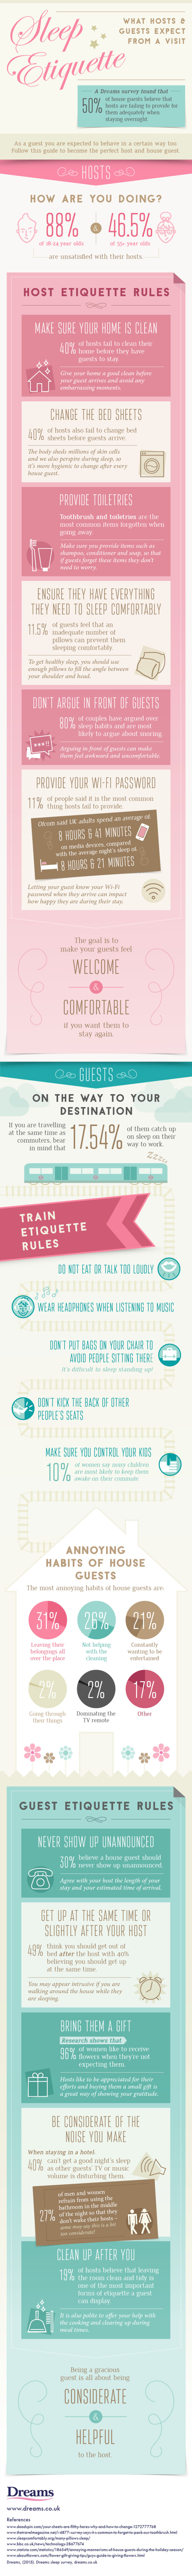 Sleep Etiquette We All Need To Agree On, an infographic from The Sleep Matters Club.